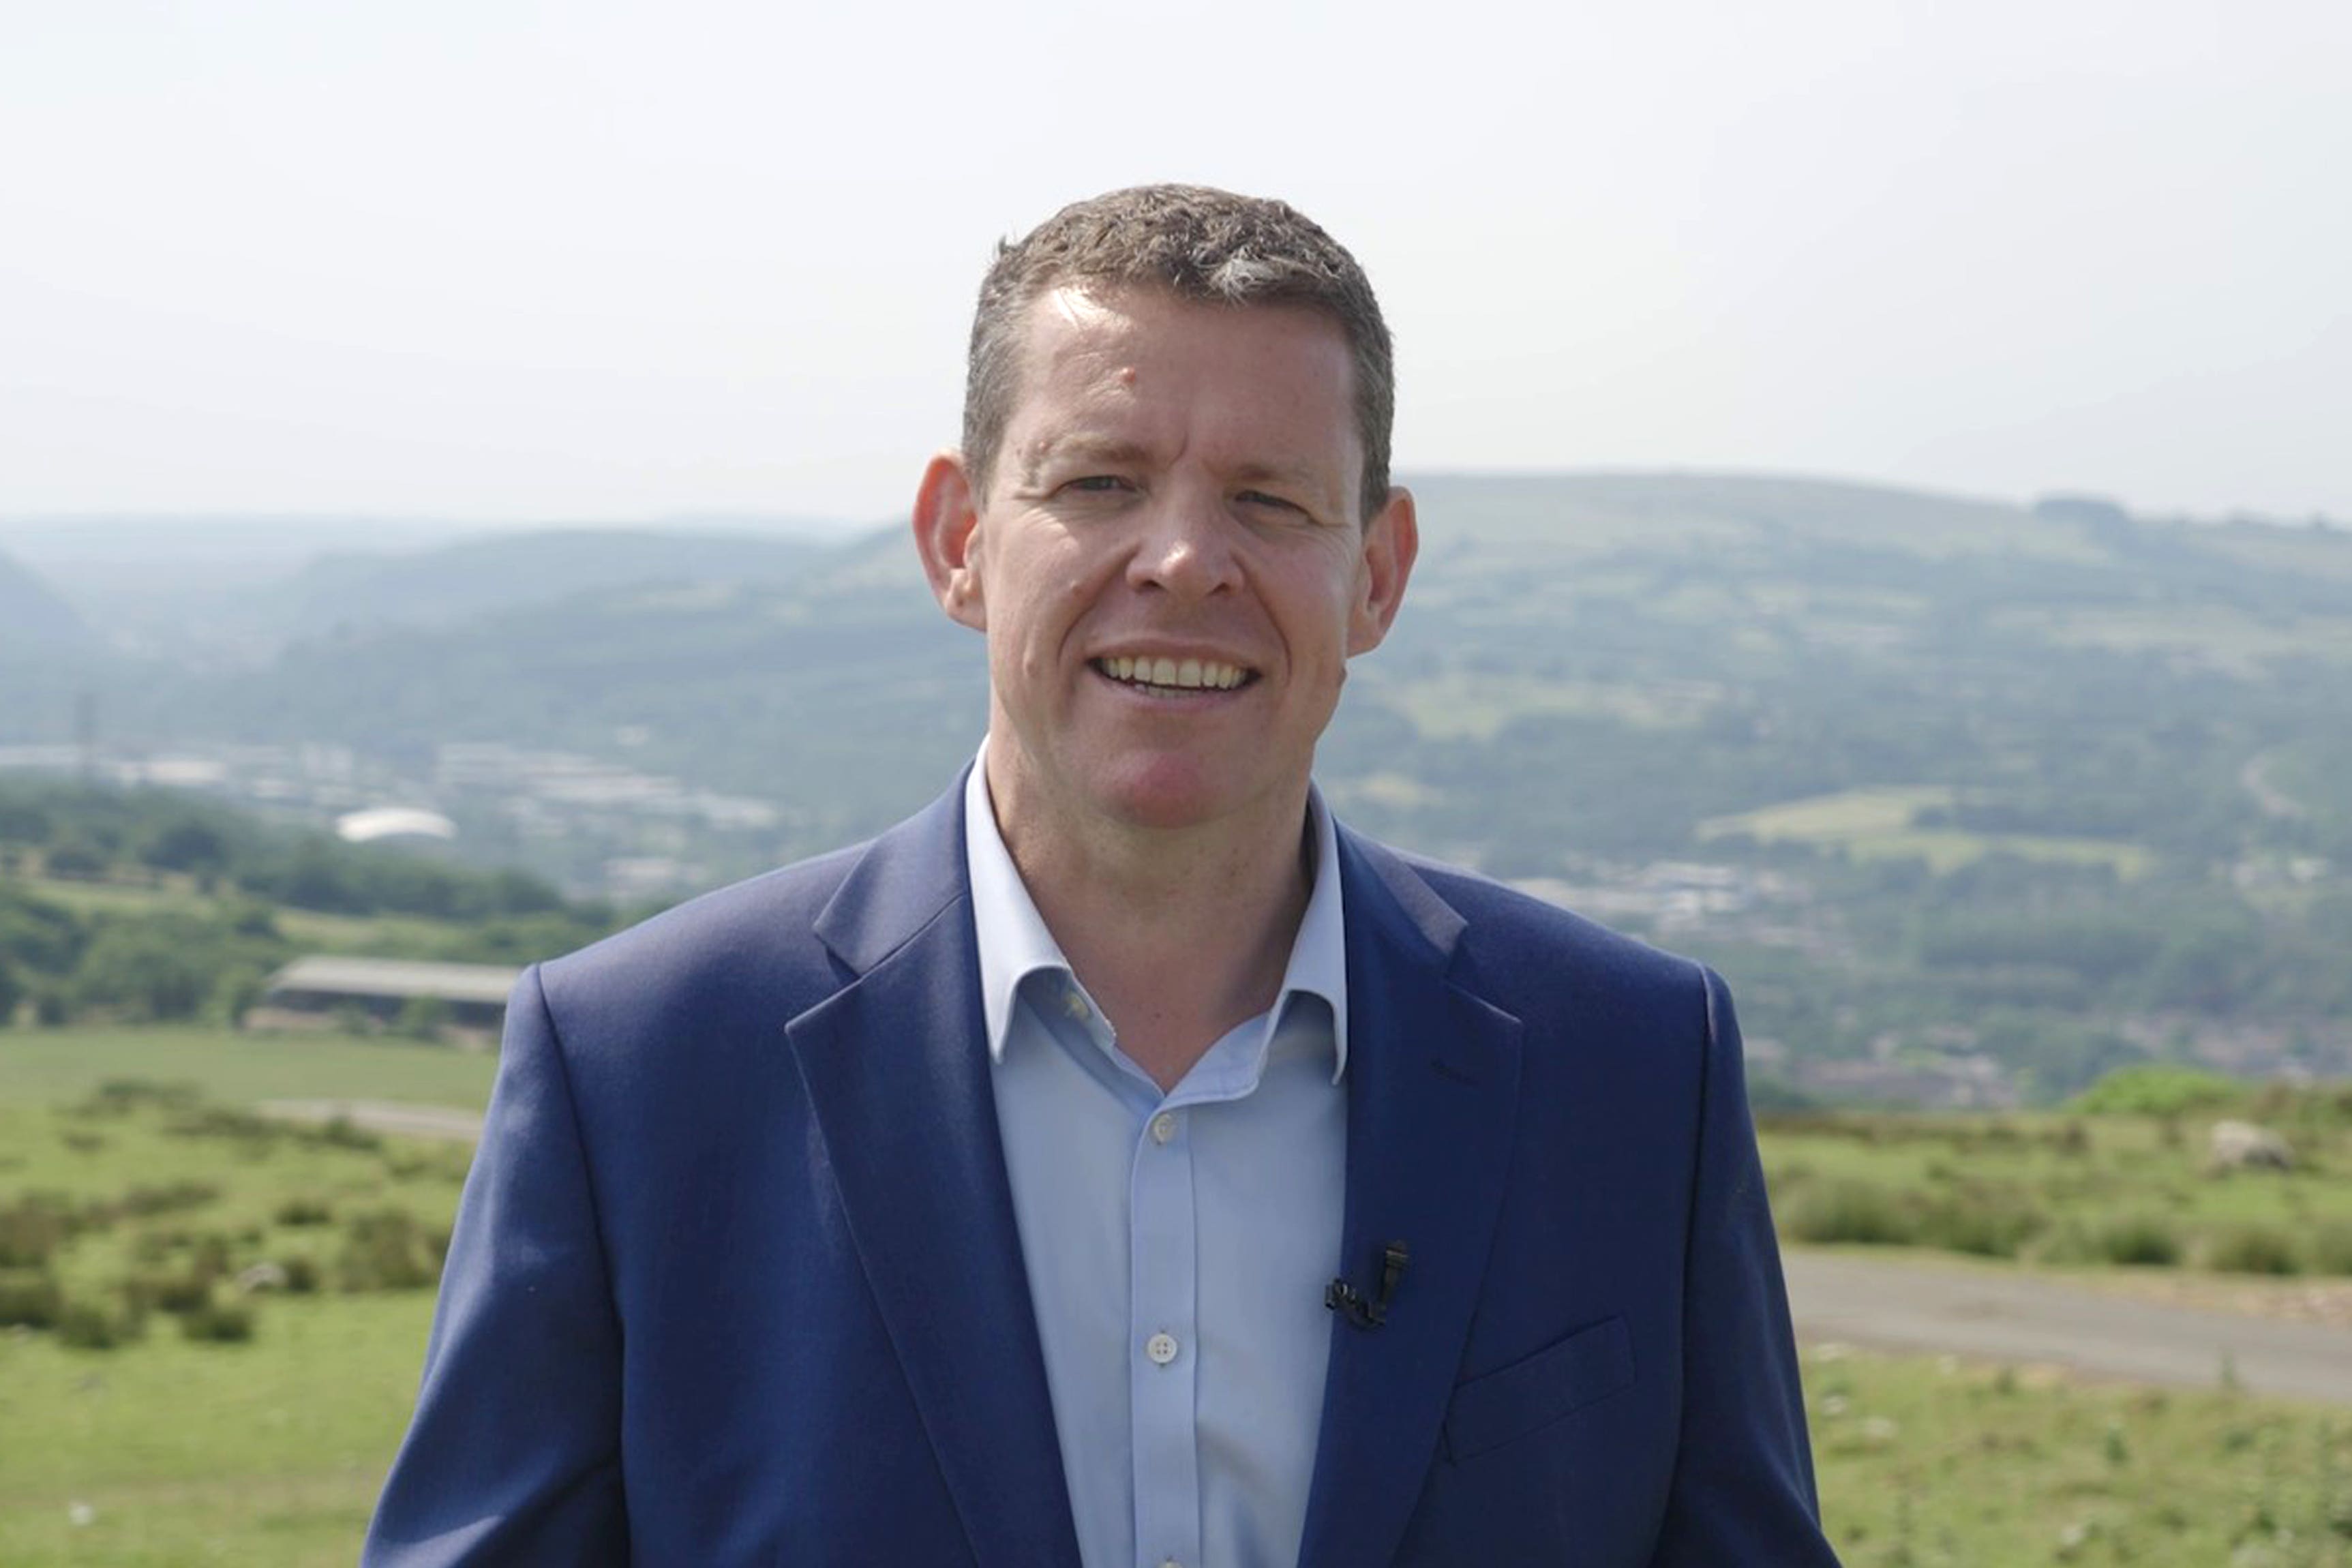 Rhun ap Iorwerth cited the series of controversies plaguing Vaughan Gething in his announcement on Friday